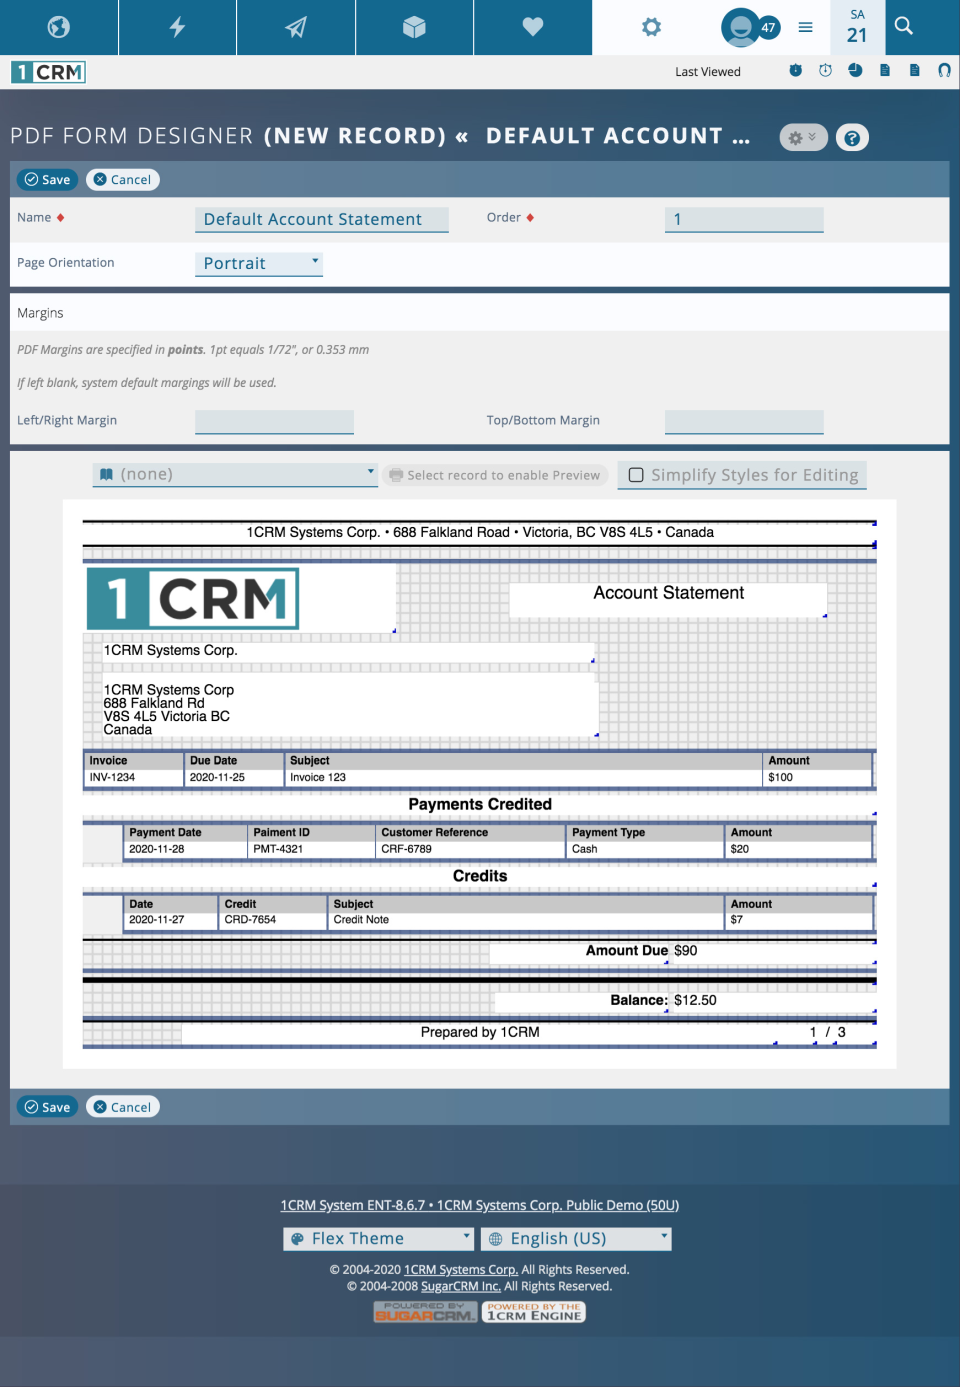 1CRM Software - 5